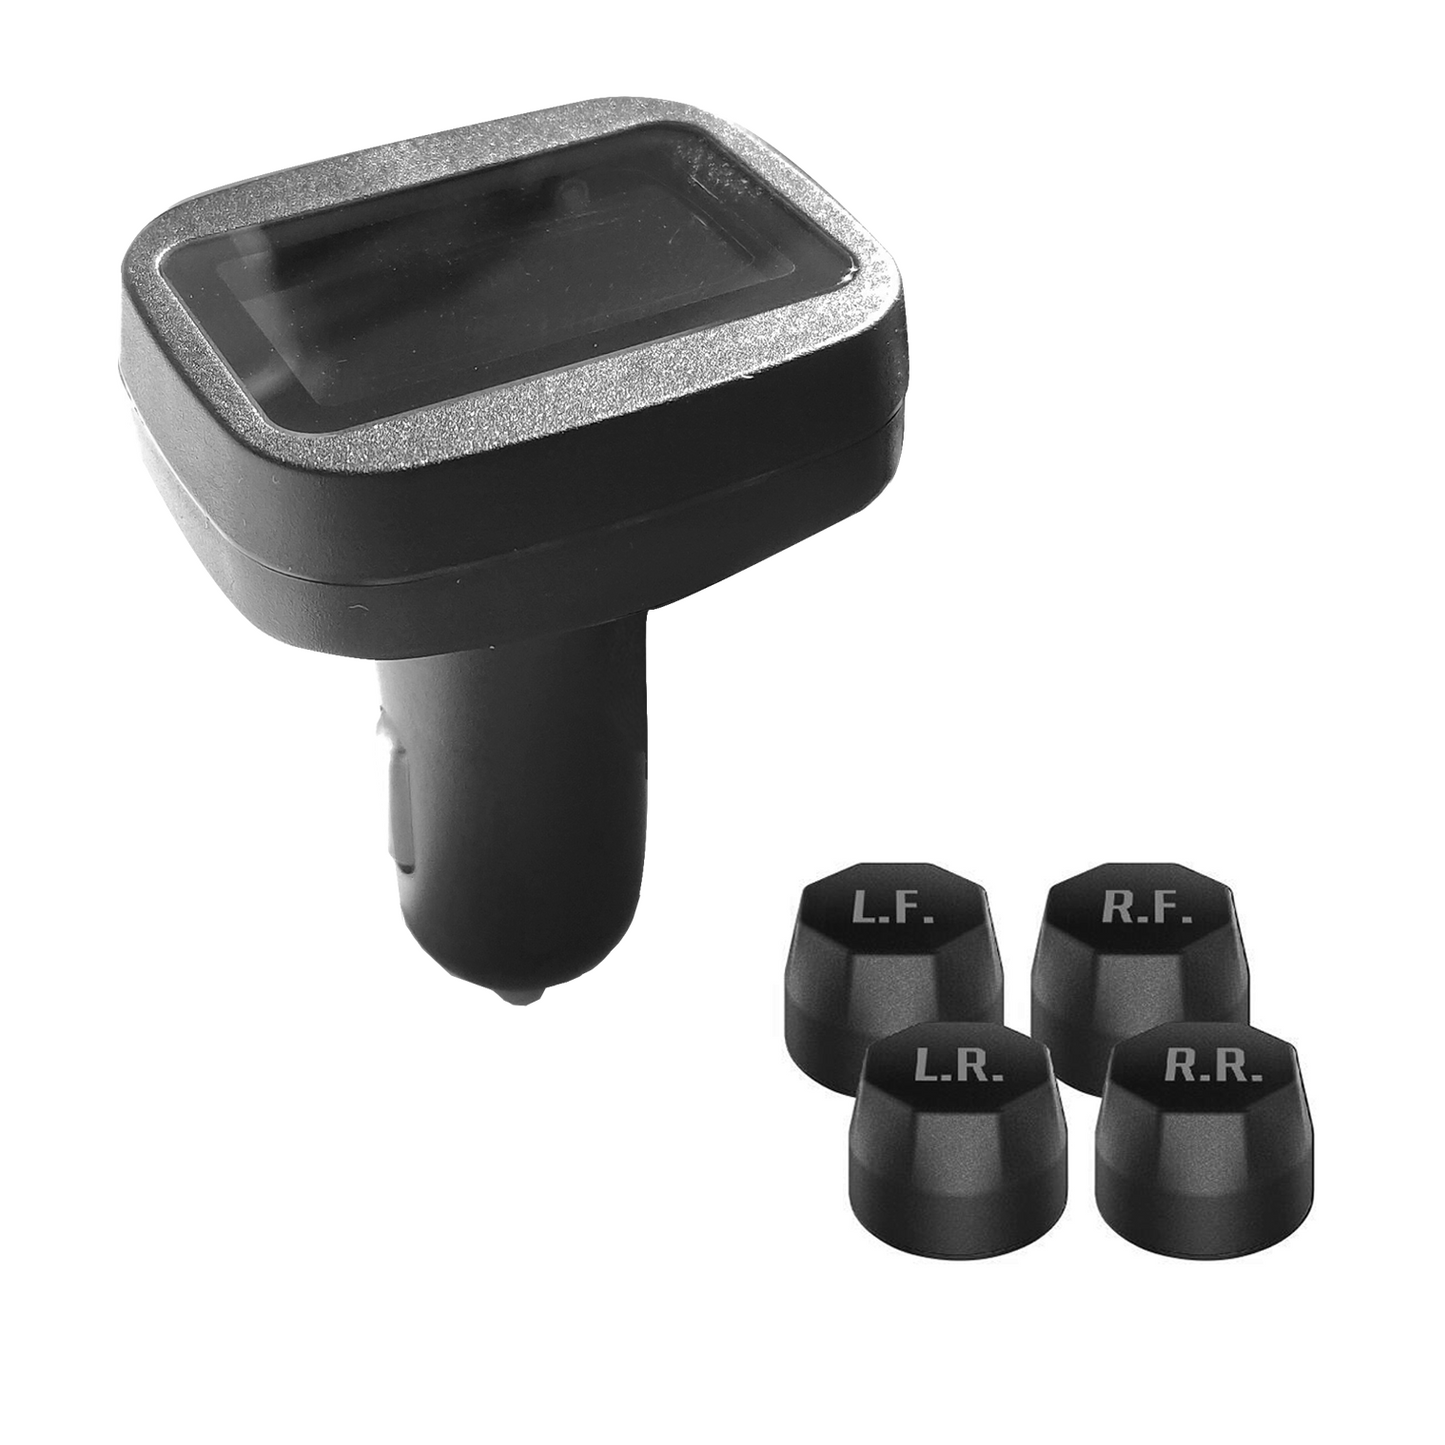 Mata C One-Button TPMS for 4WDs & Offroaders